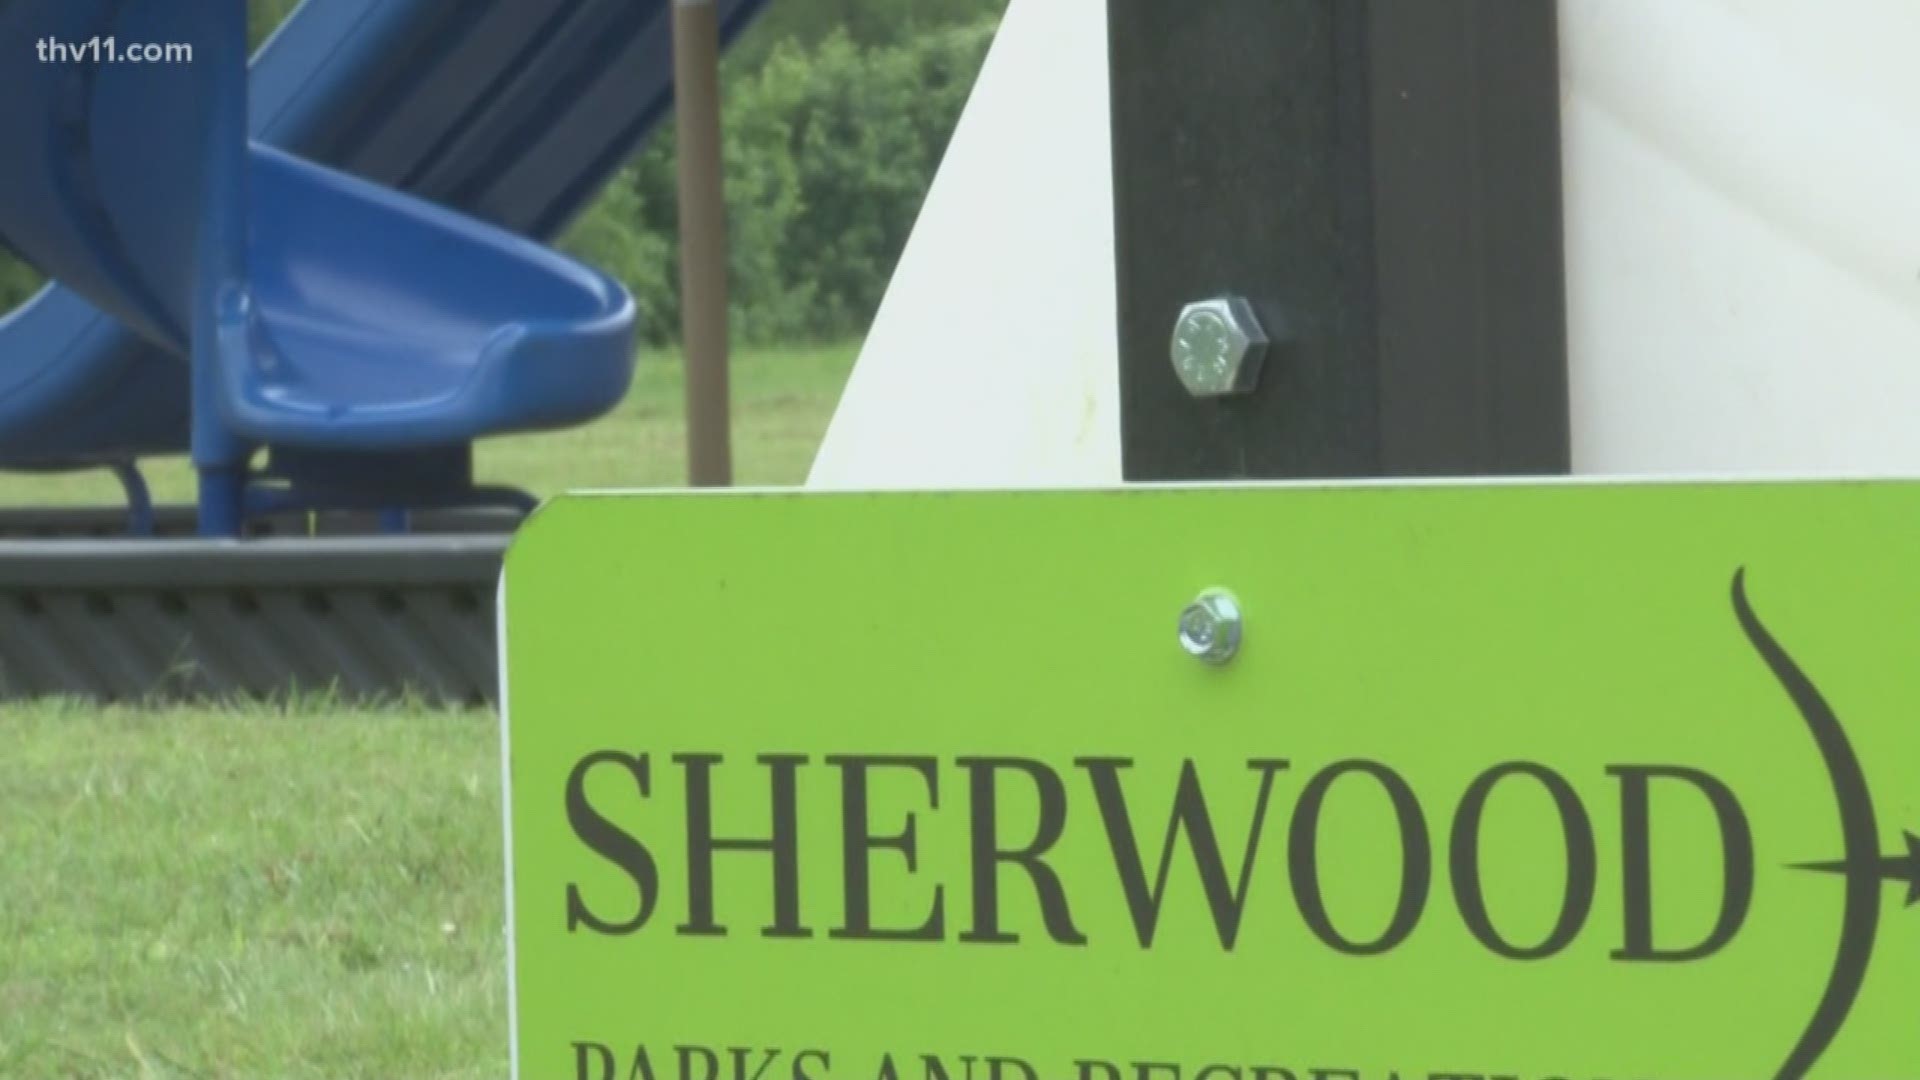 A video posted on a neighborhood Facebook group is getting a lot of attention from people in the Sherwood area.